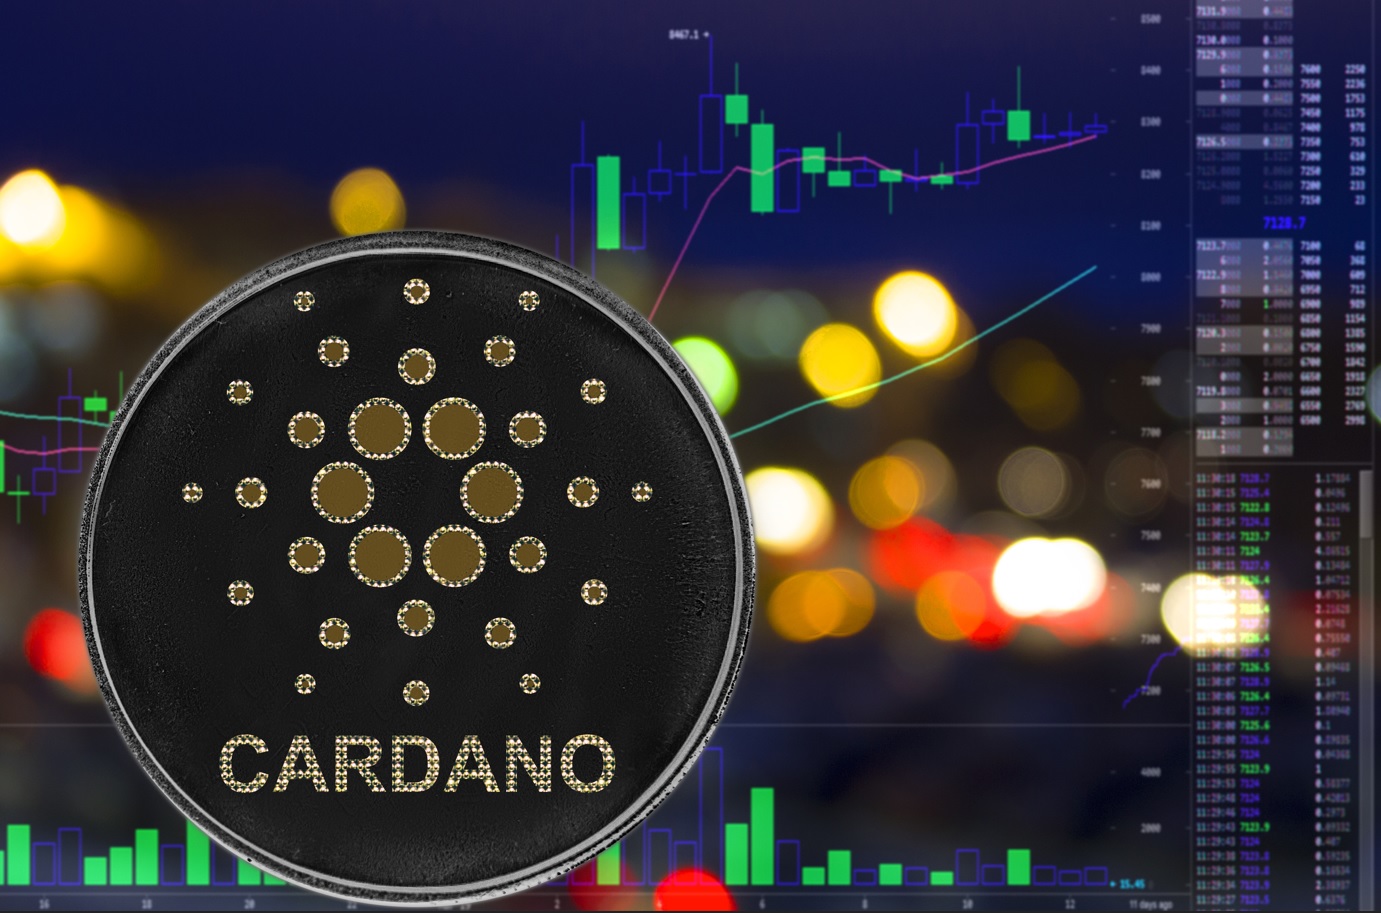 Cardano price: Analyst explains ADA price outlook over coming weeks